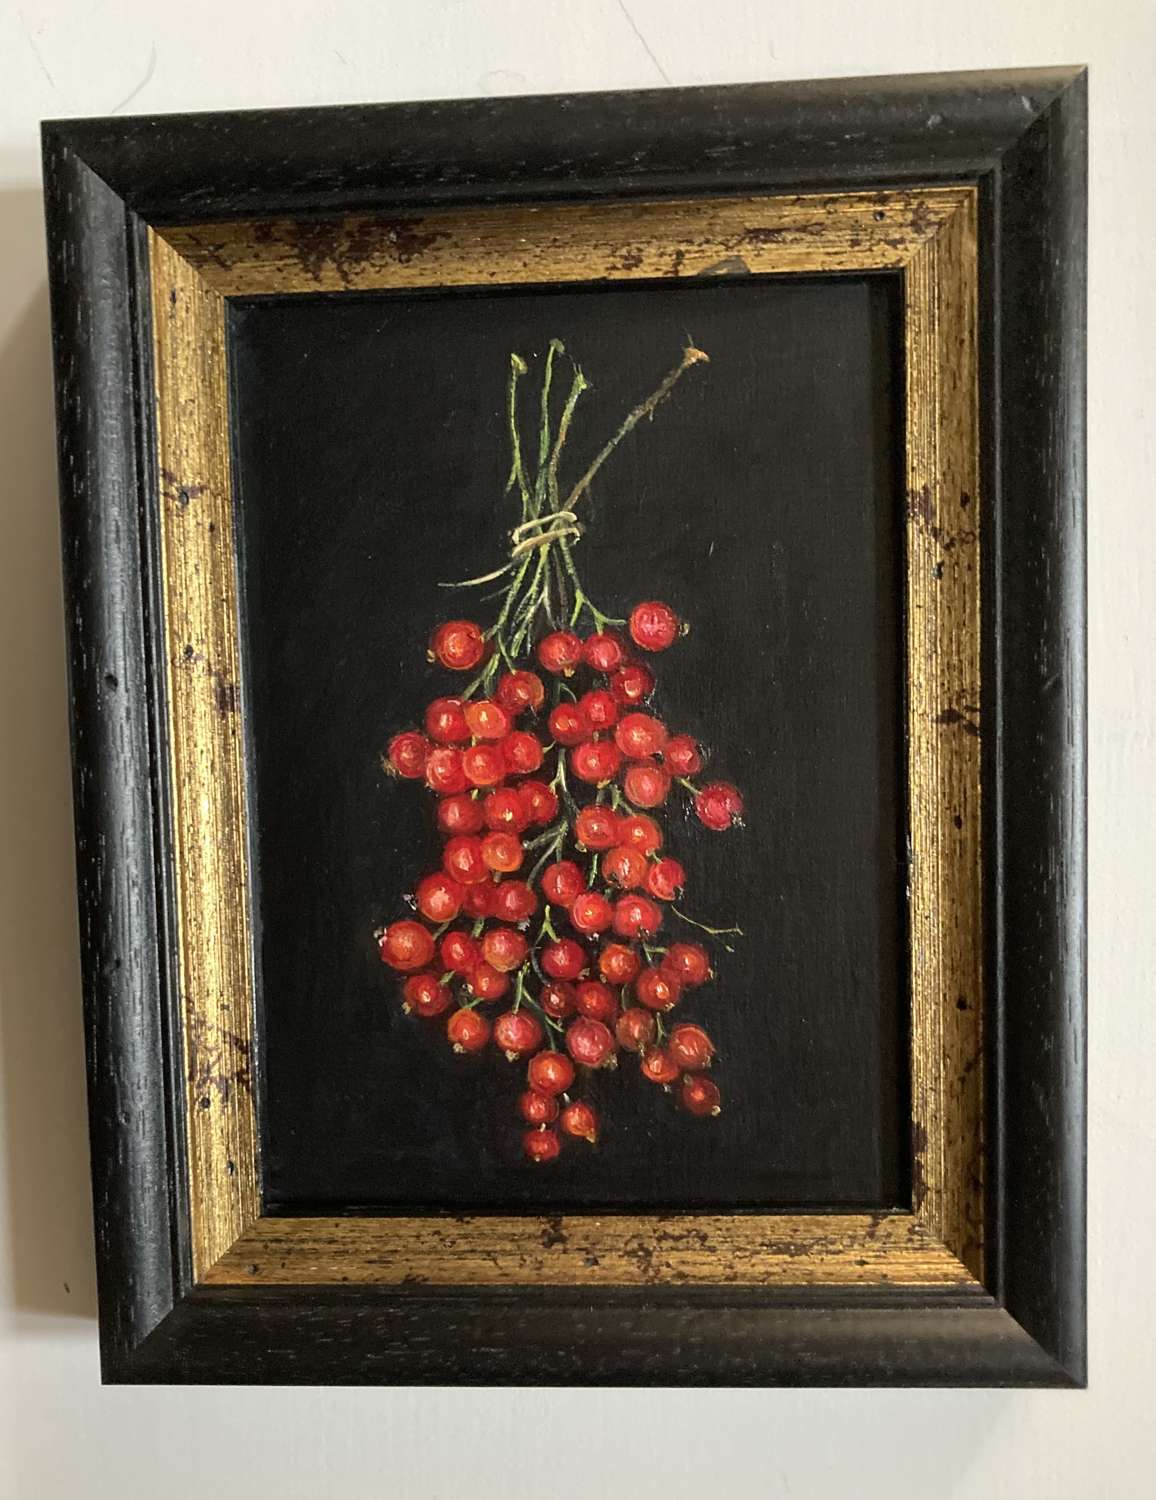 Bunch of red currants